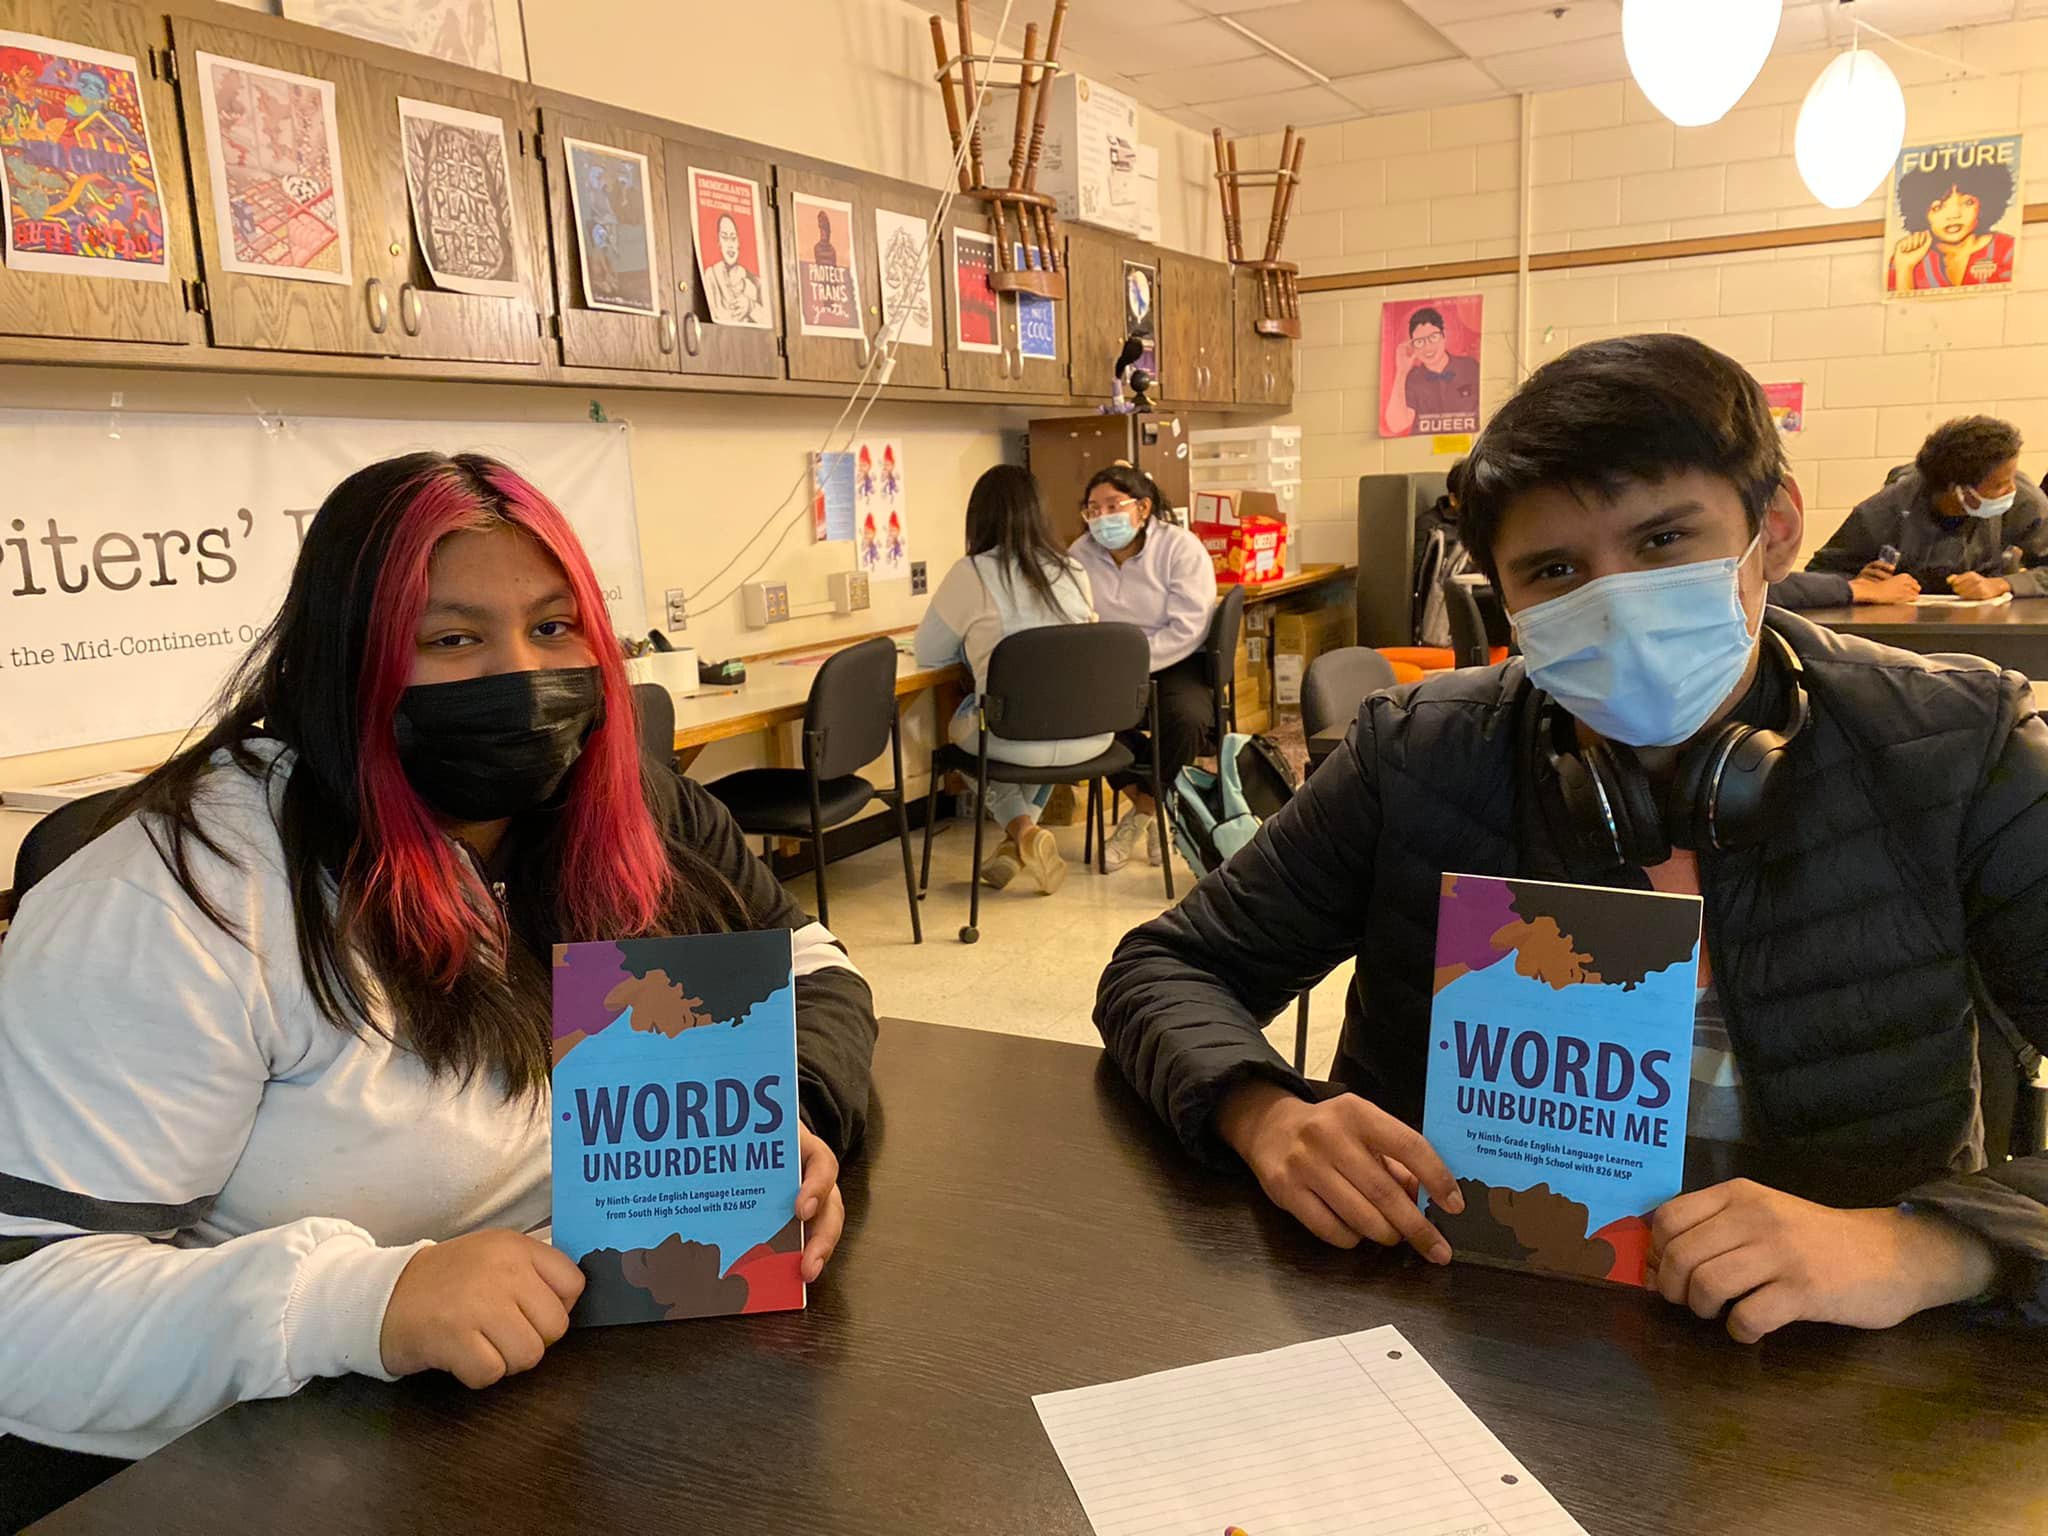 Two teenagers sitting in a classroom holding a book with the title "Words Unburden Me"